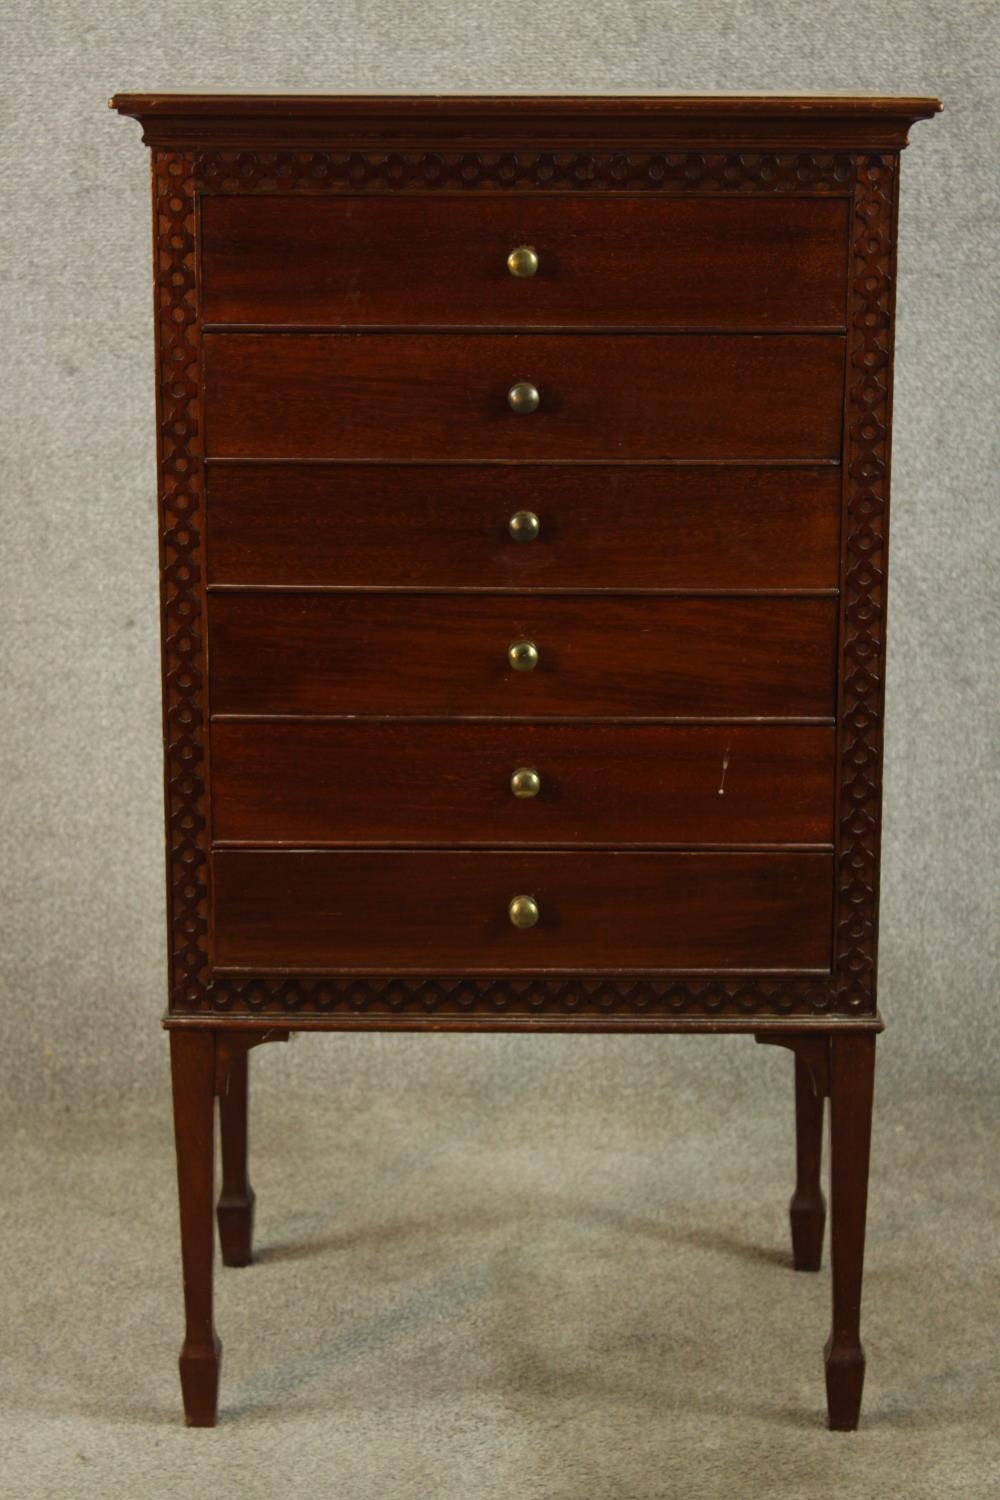 An Edwardian mahogany six drawer music cabinet with brass knop handles, raised on square tapering